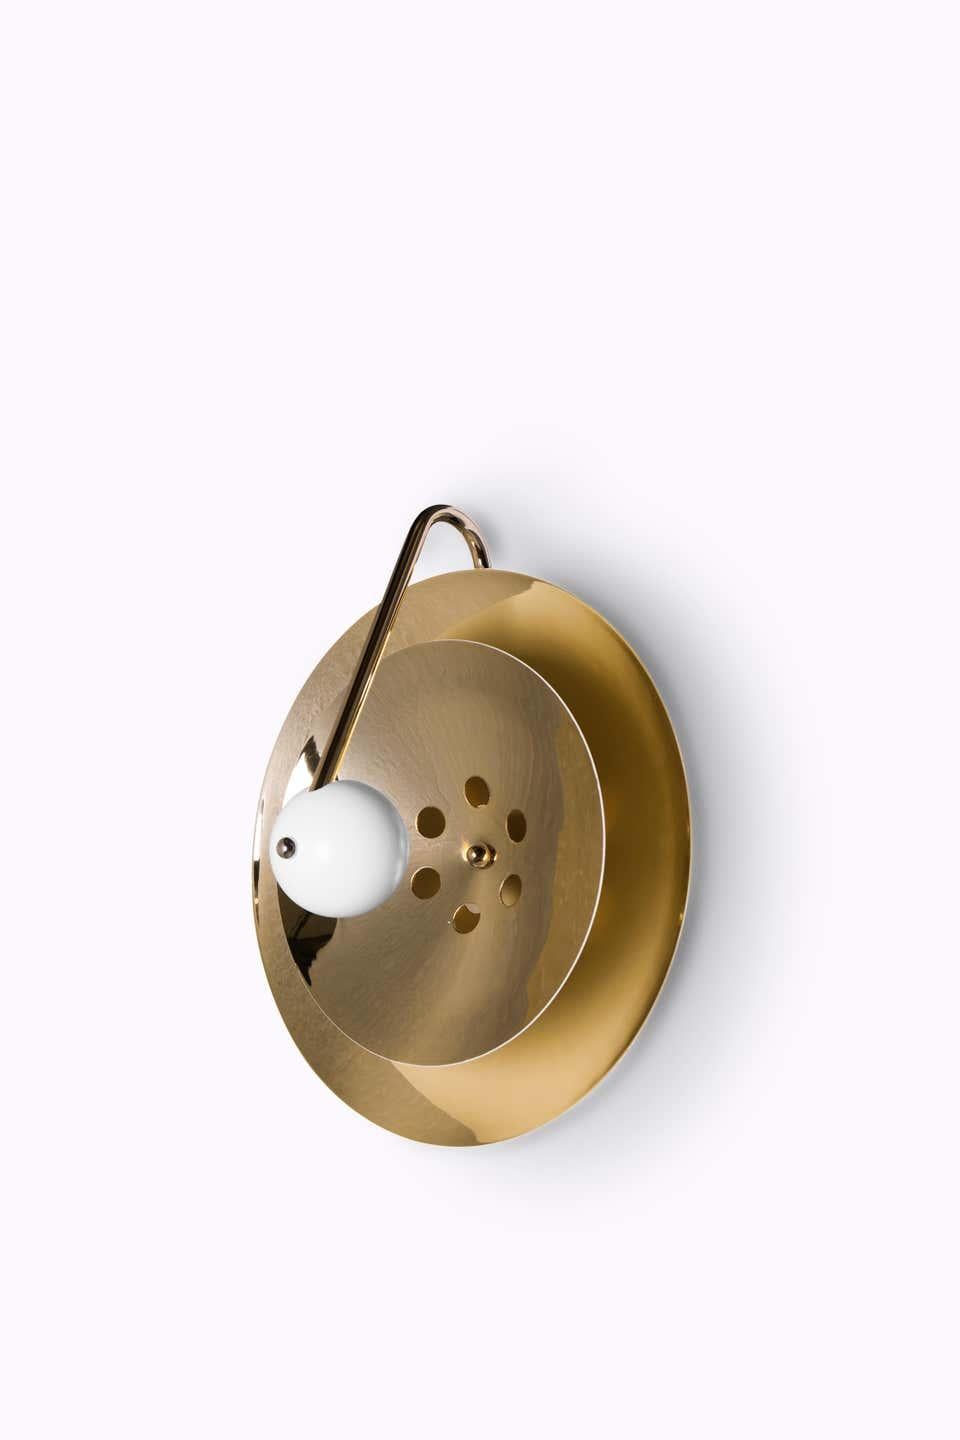 The vintage midcentury lamp has a set of distinctive features which make it a stunning statement piece. It is an indoor wall light handmade in brass, with a center shade made in aluminum and a mesmerizing gold-plated standard finish.
Measures: